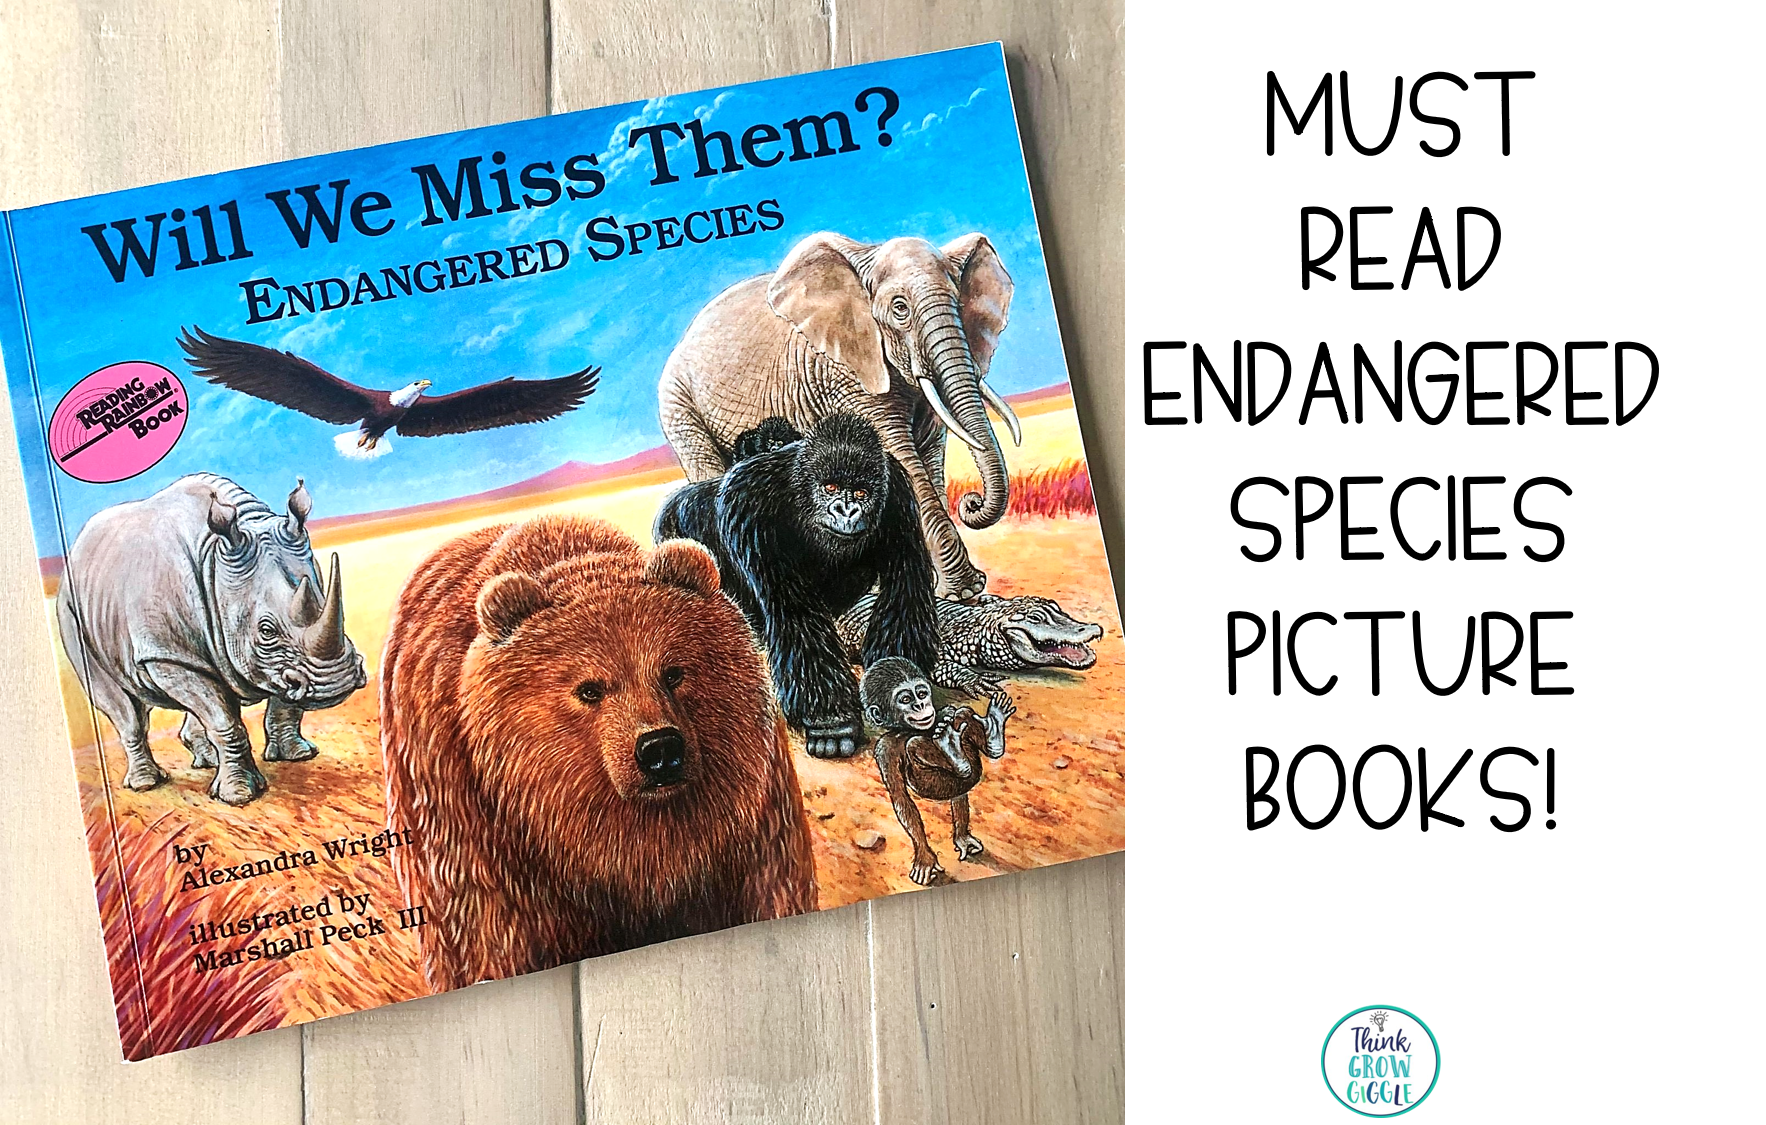 8 Must Read Endangered Species Picture Books - Think Grow Giggle